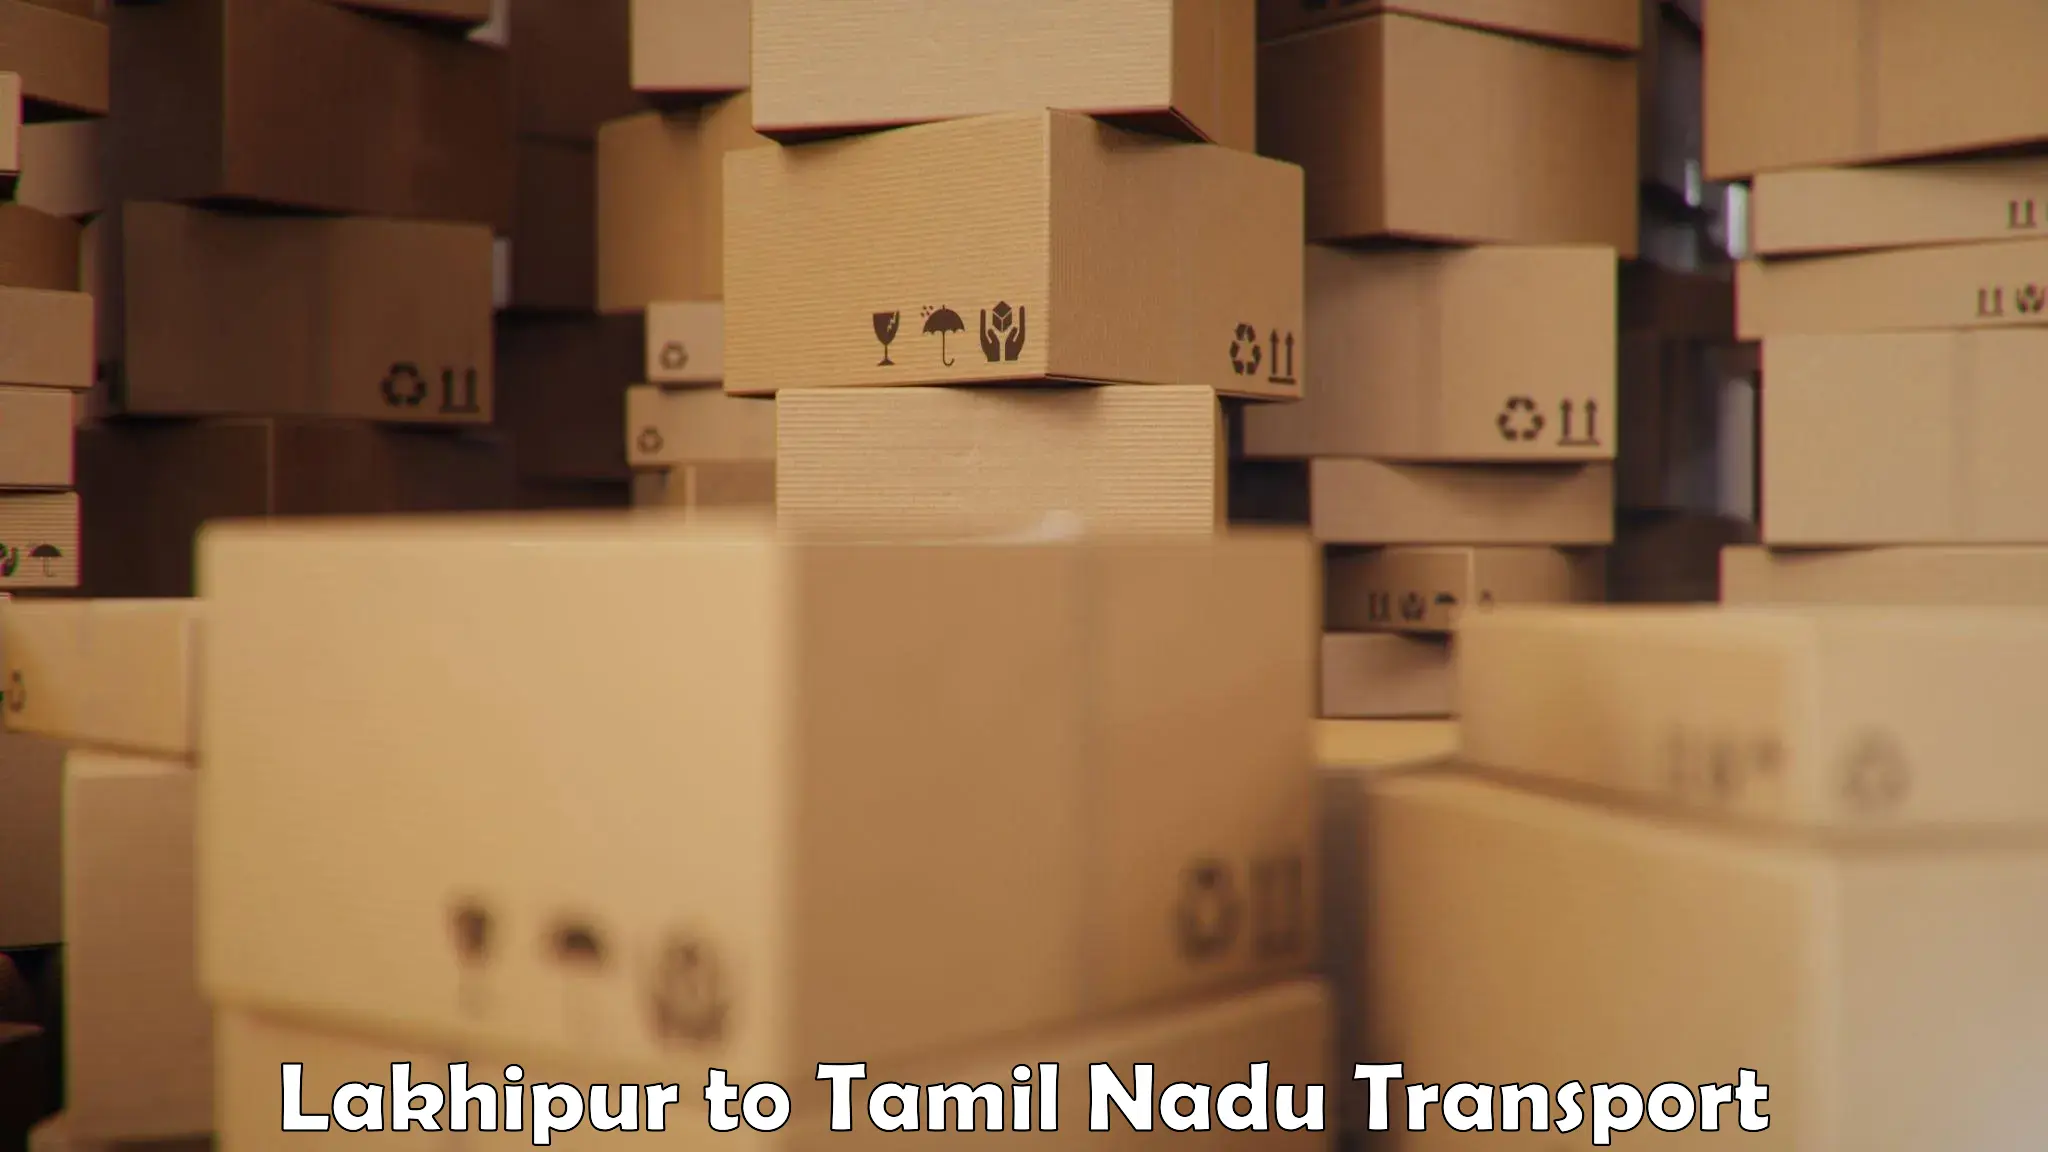 Cargo transportation services Lakhipur to SRM Institute of Science and Technology Chennai